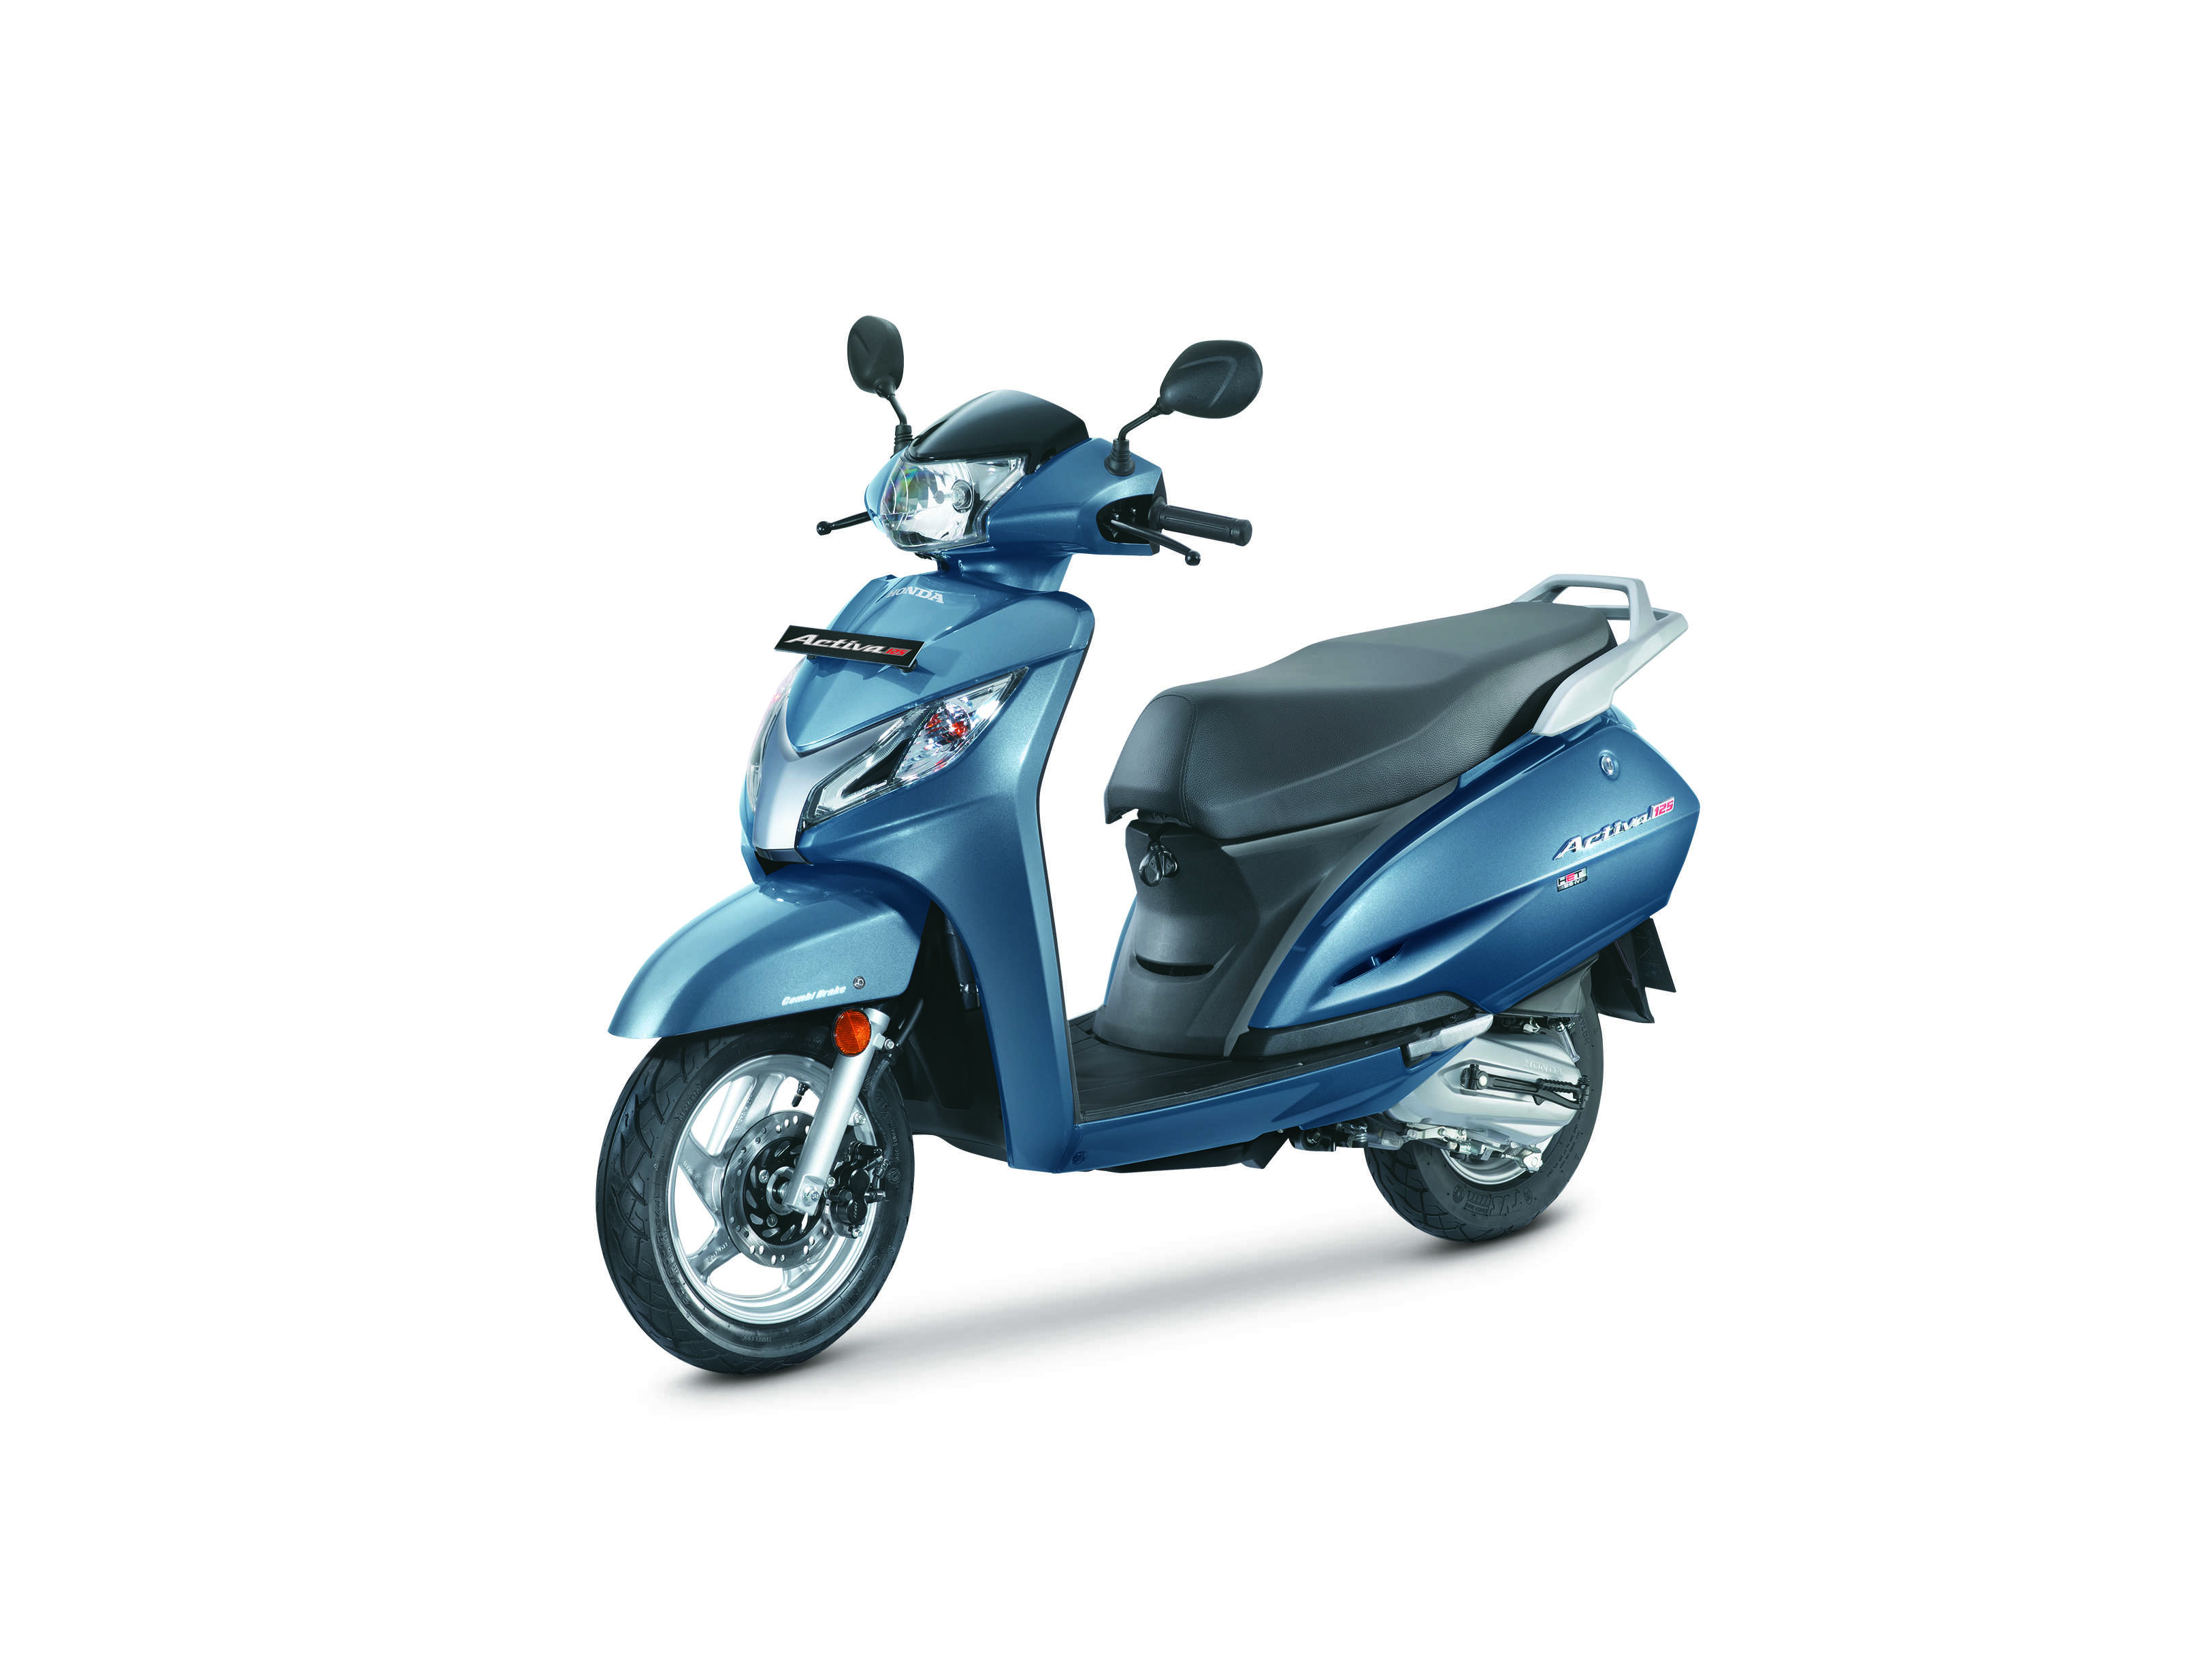 New Activa 125 Colors